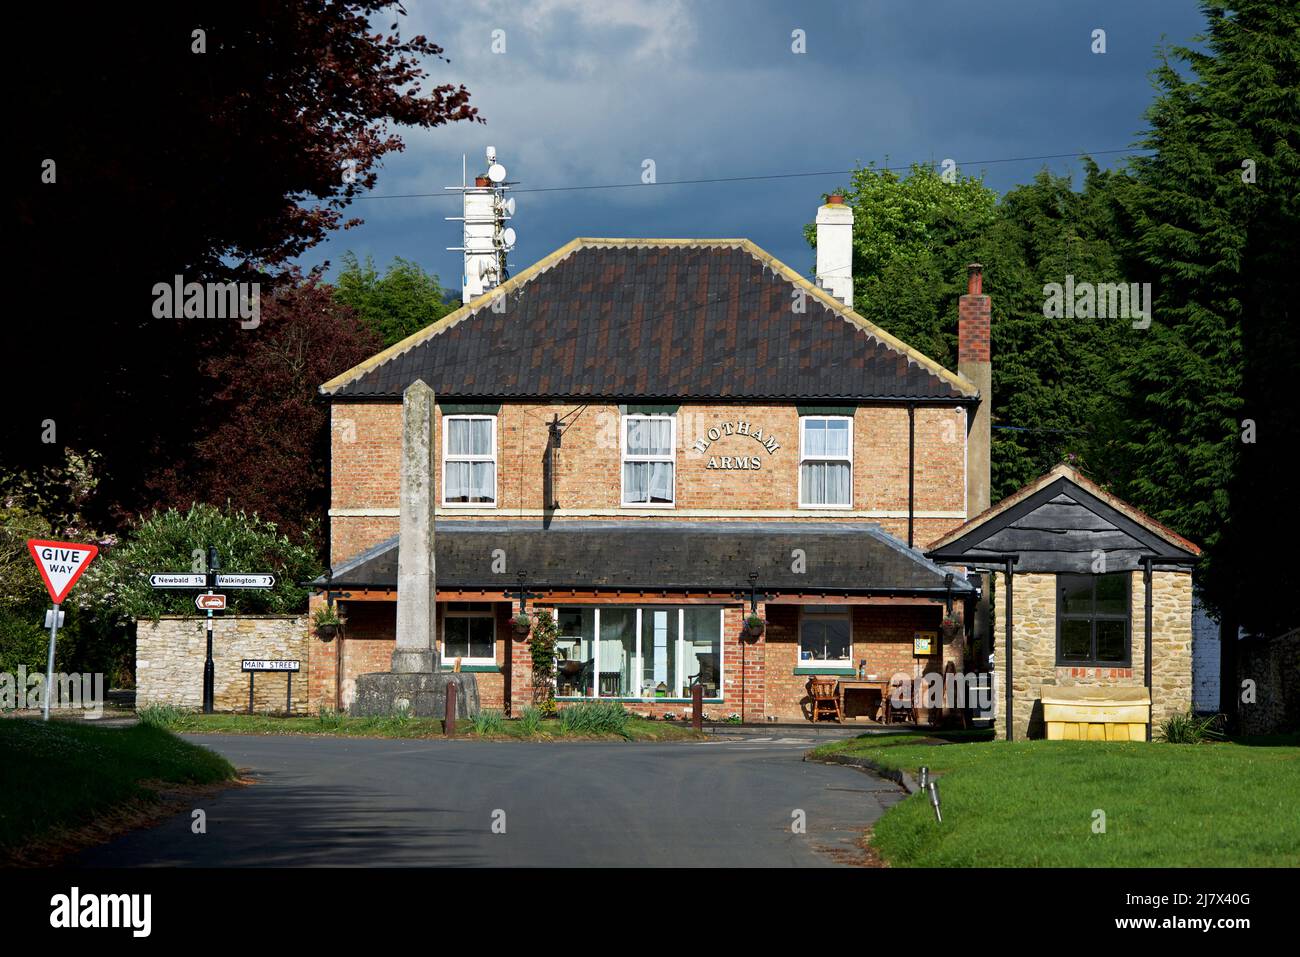 The Hotham Arms, in the village of Hotham, East Yorkshire, England UK Stock Photo